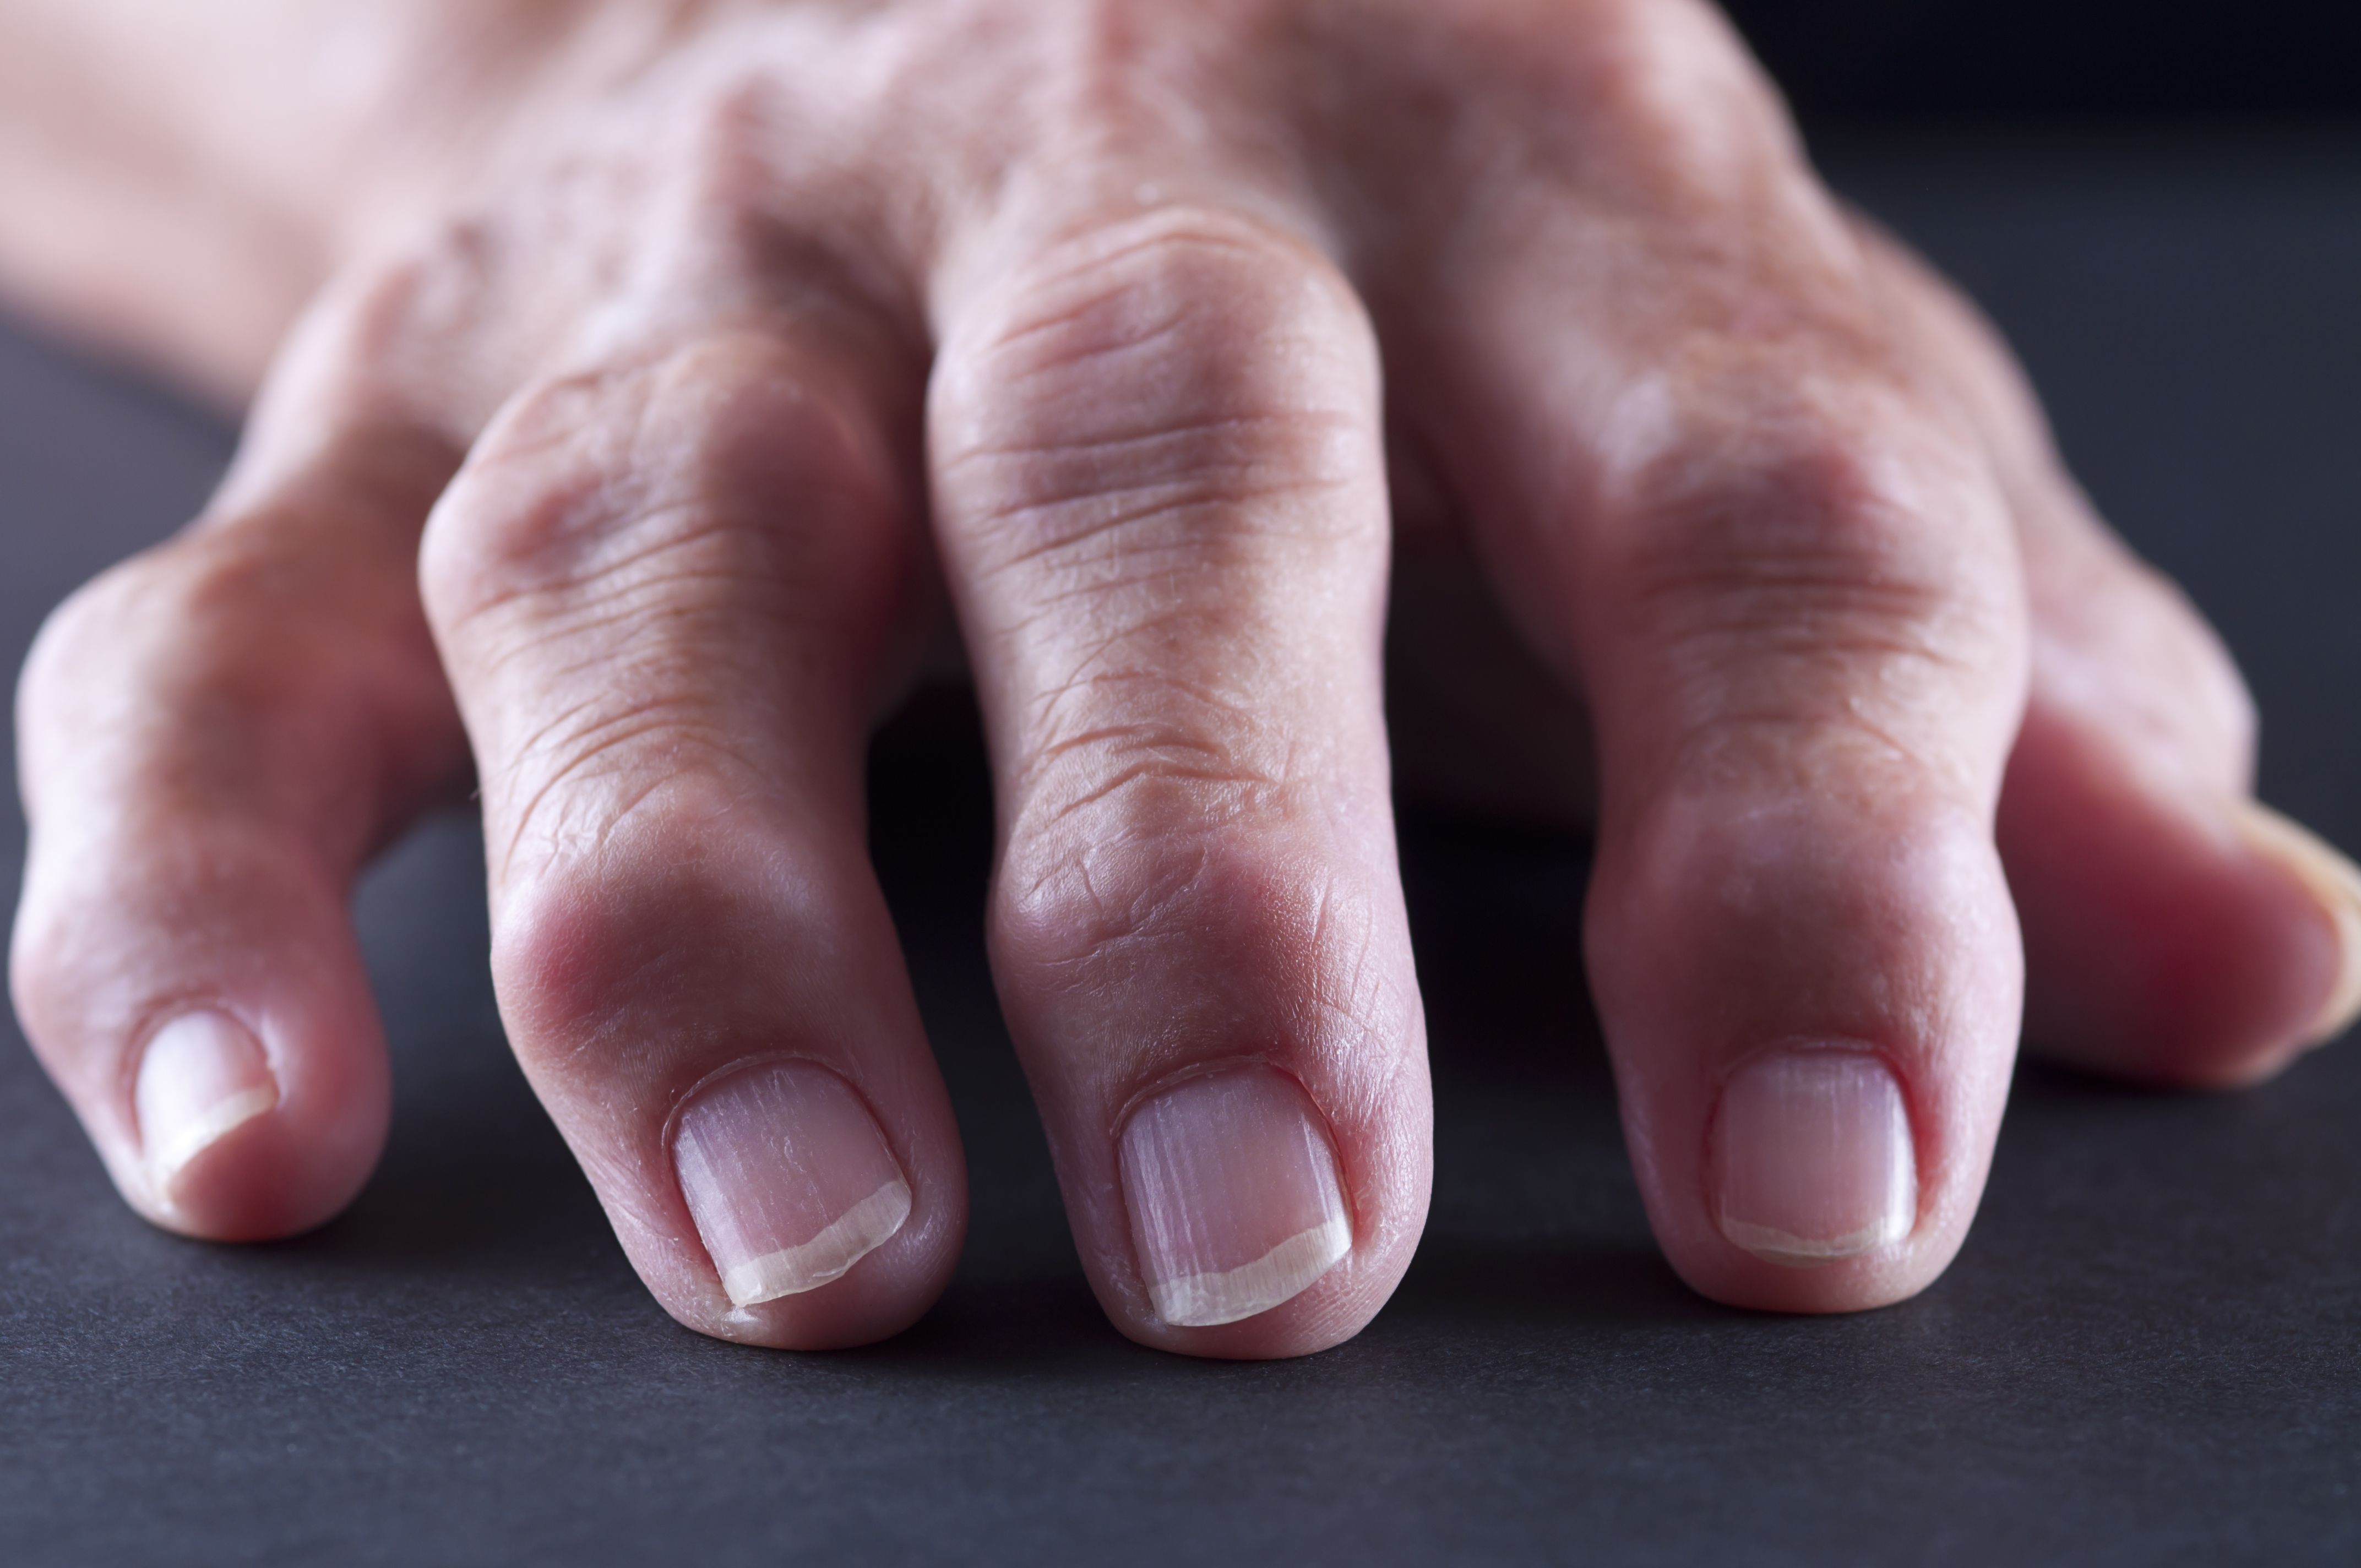 swelling painful joints in fingers and toes